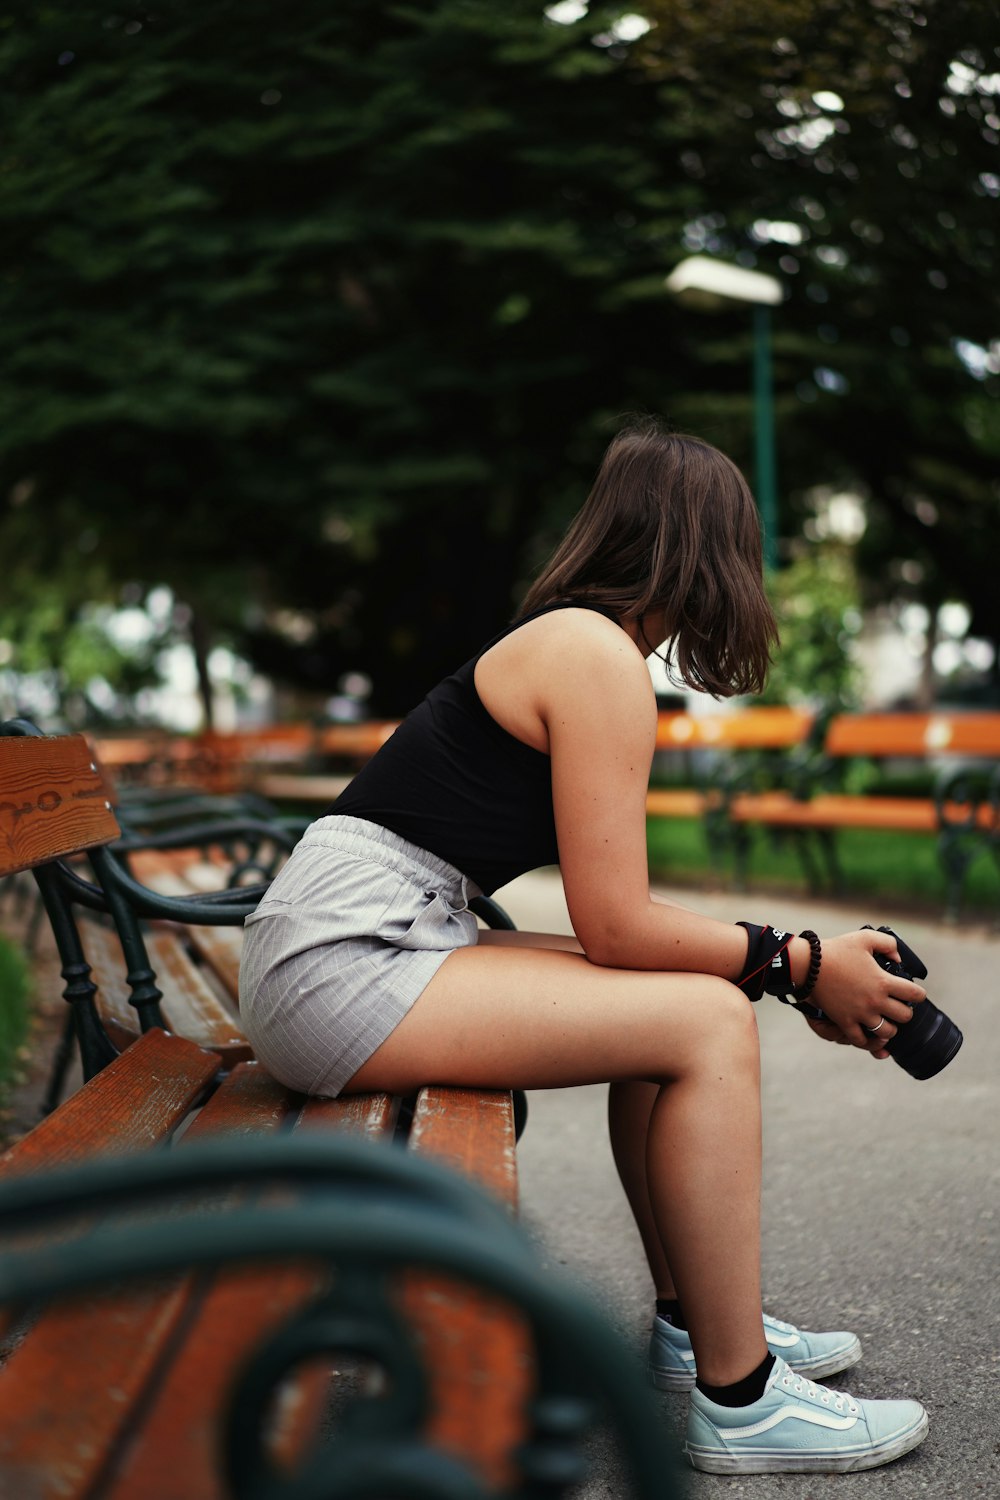 woman in black tank top and white shorts sitting on brown wooden bench holding black dslr